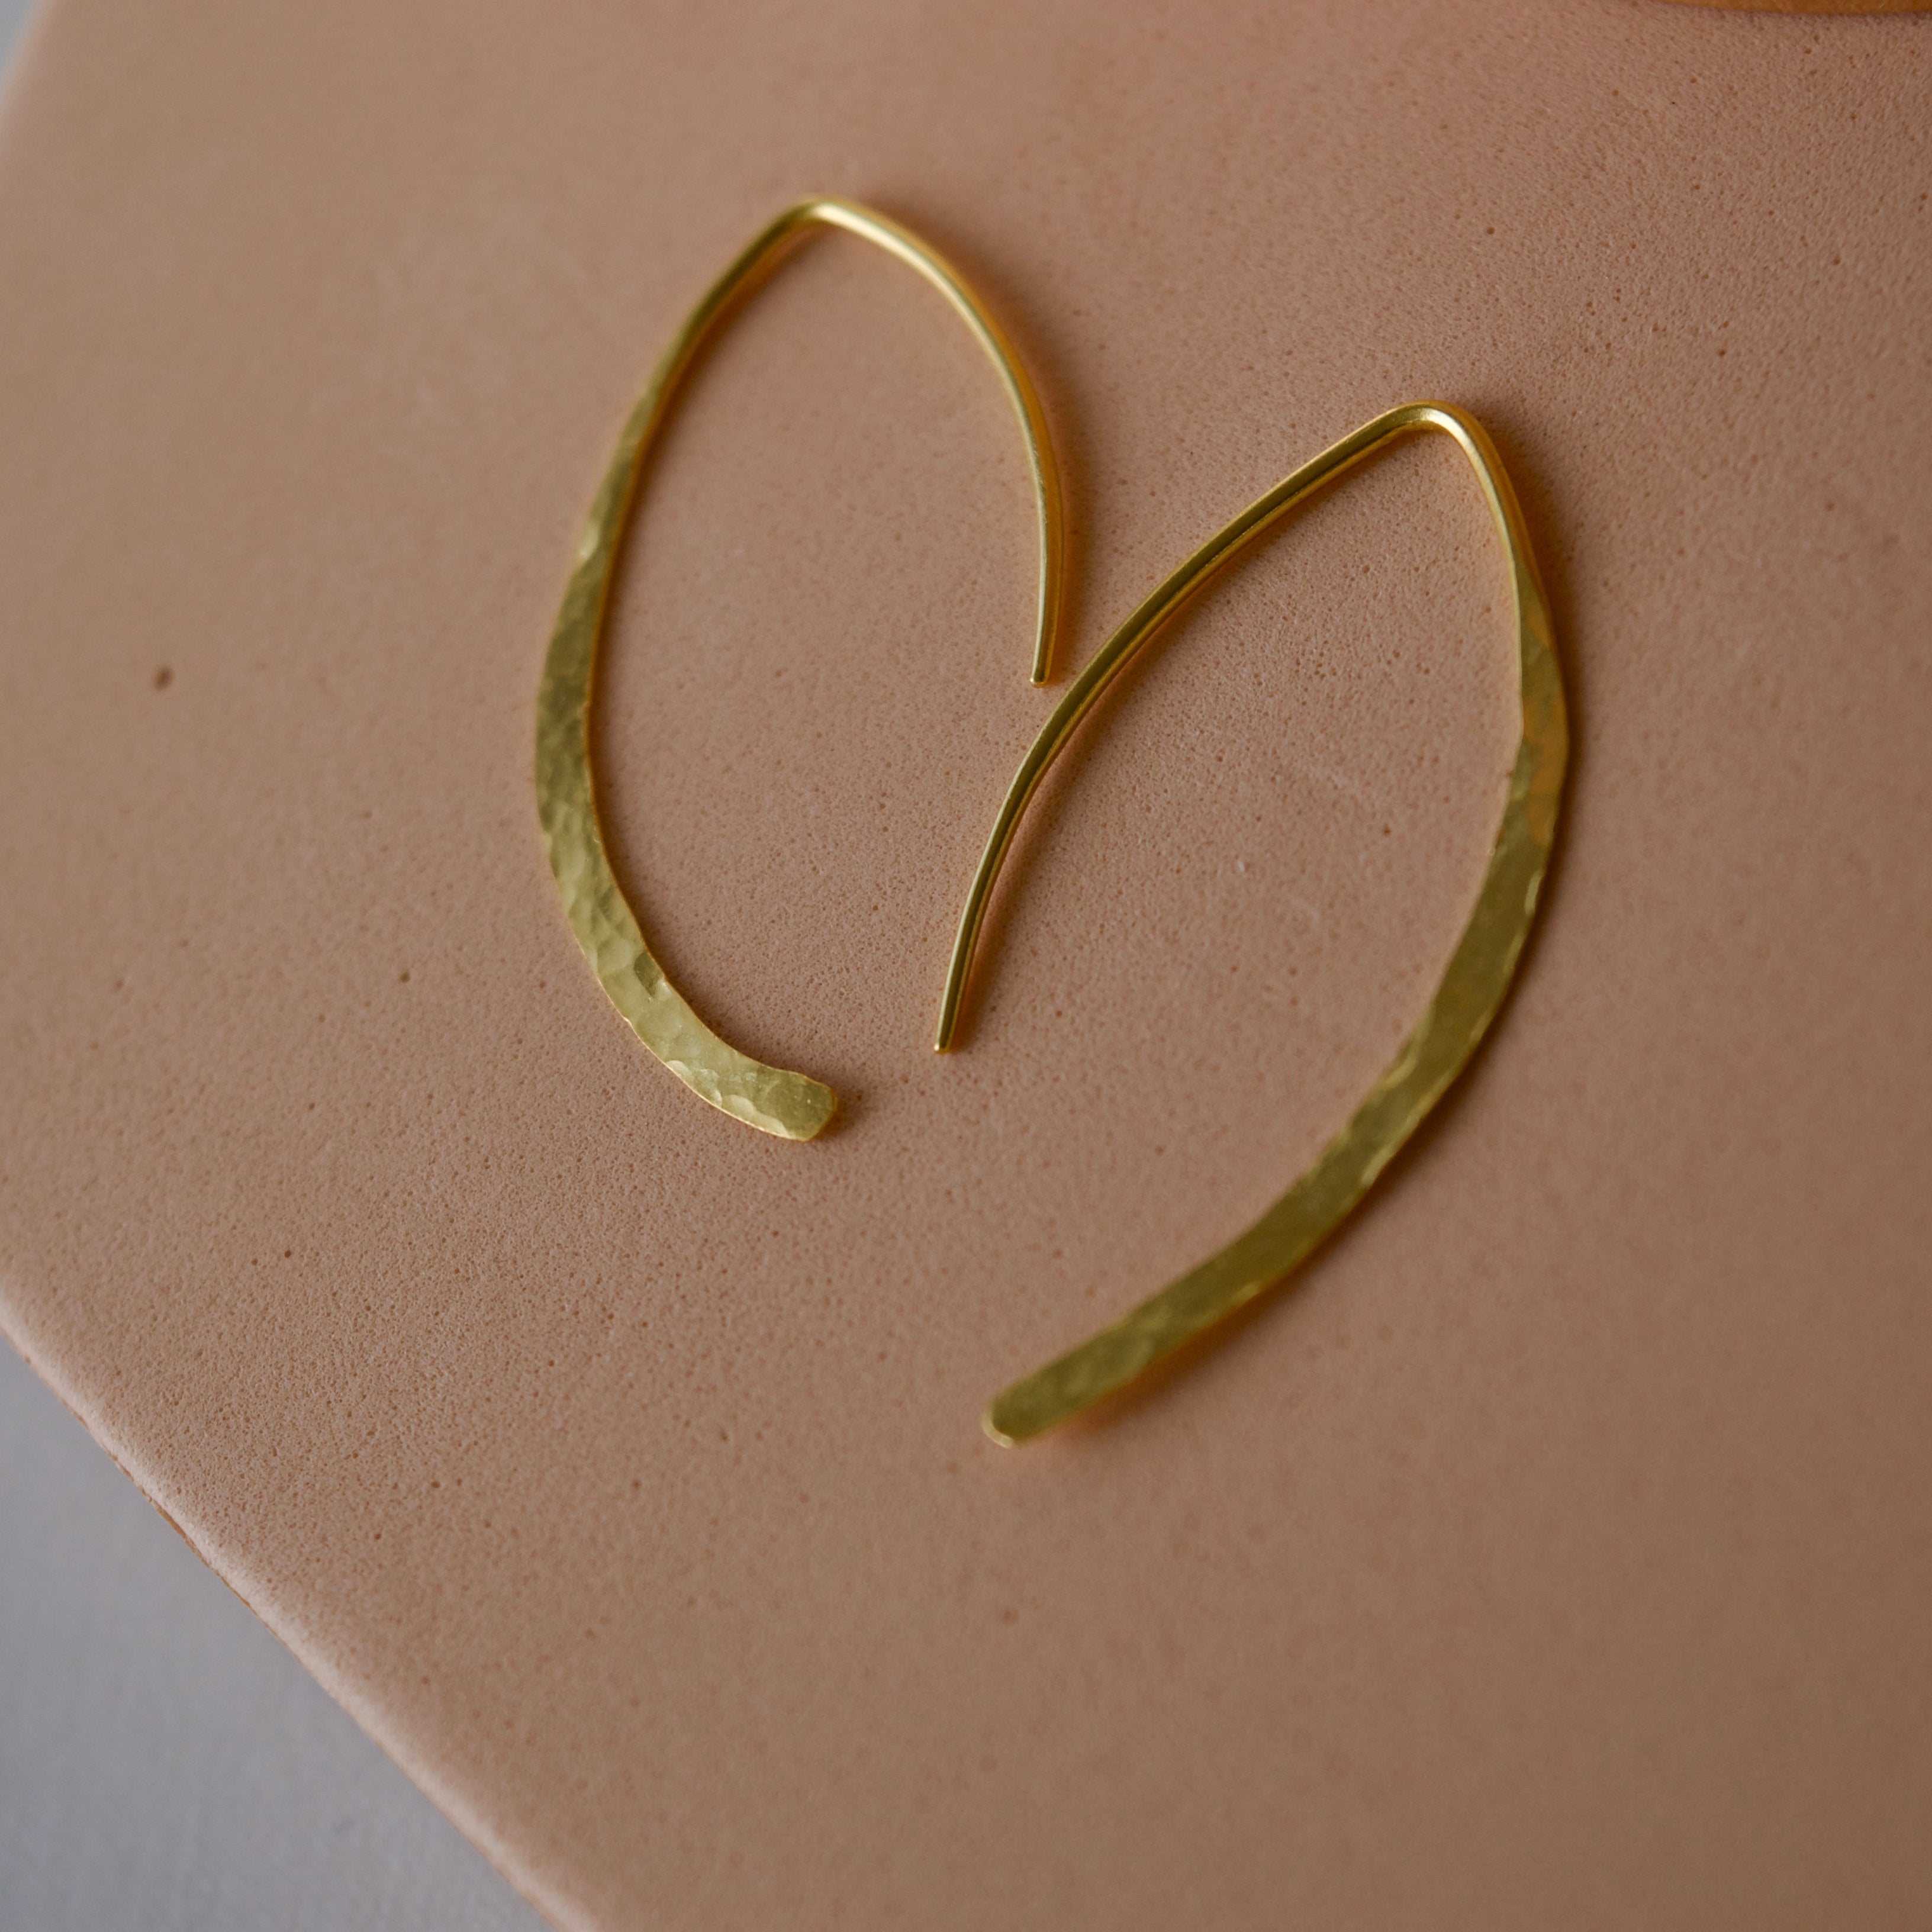 The New Essential Yellow Gold Earrings